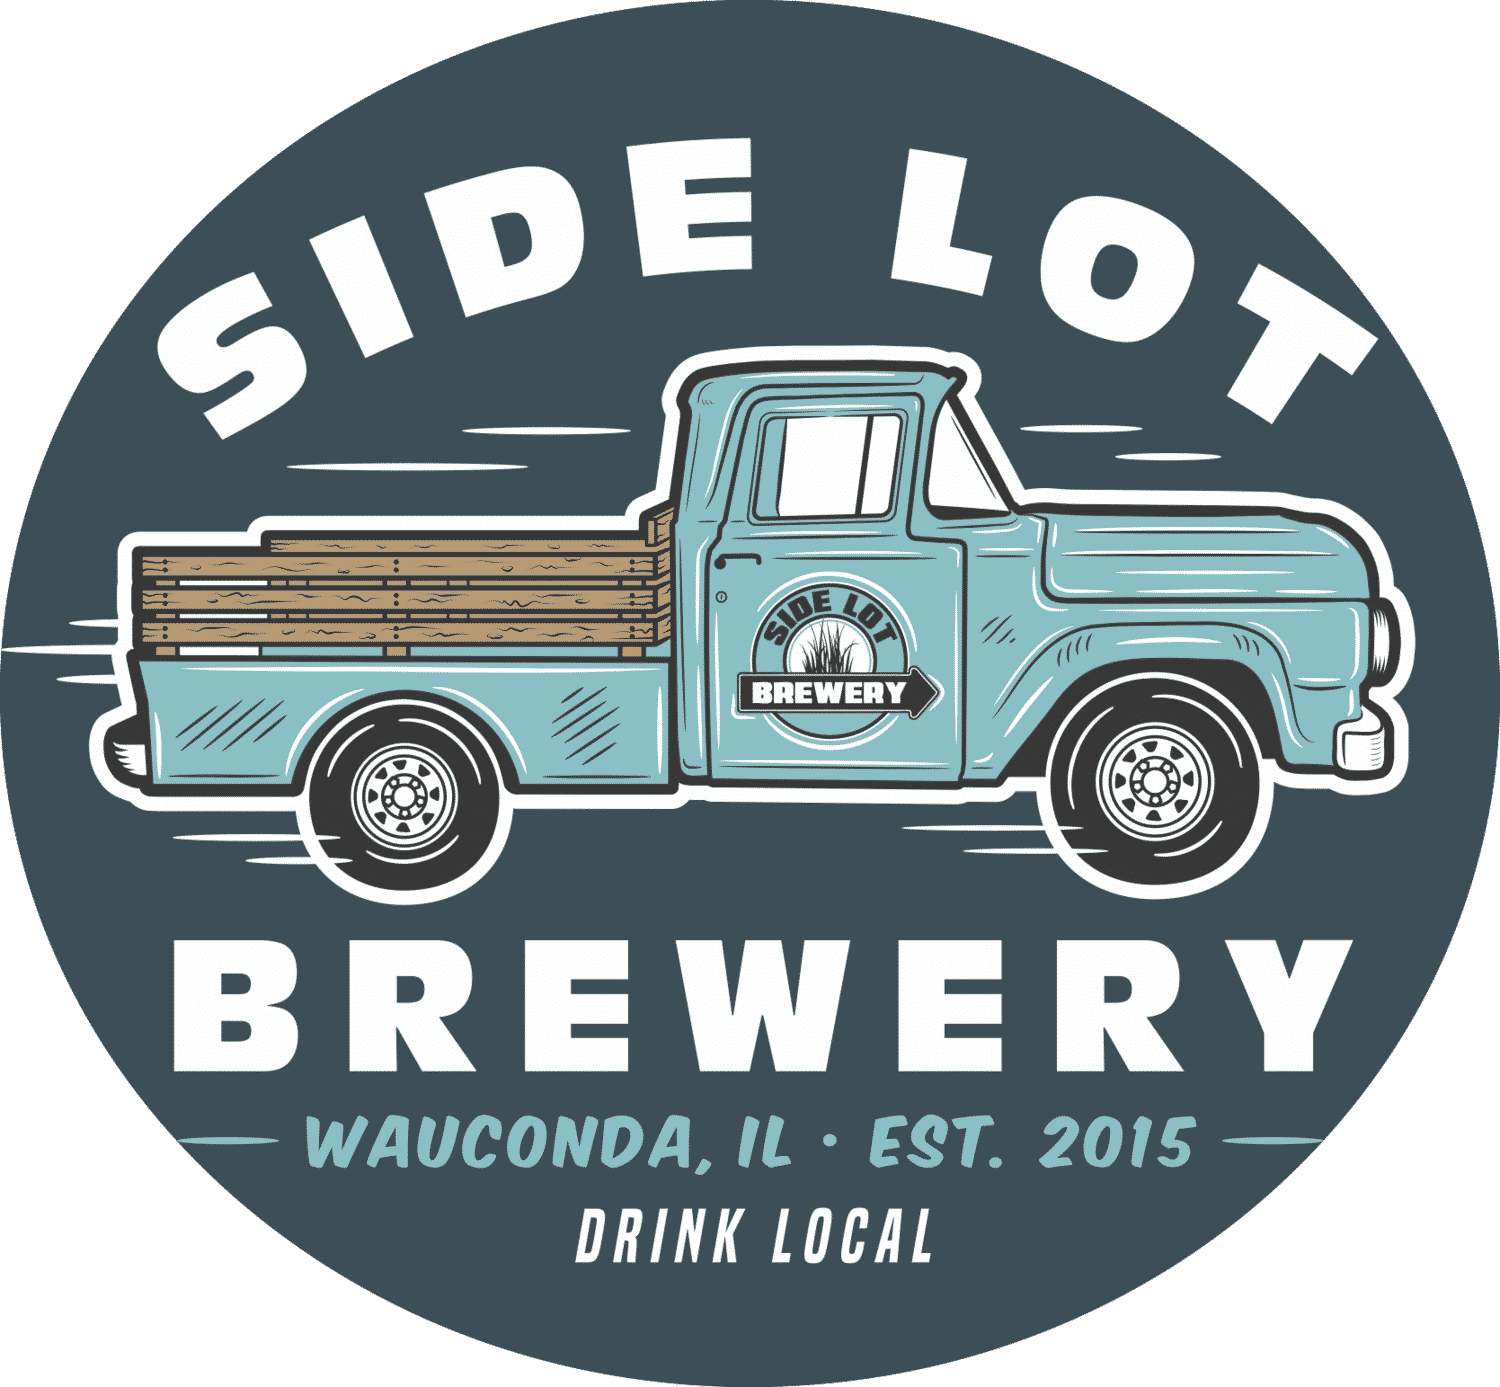 Side Lot Brewery